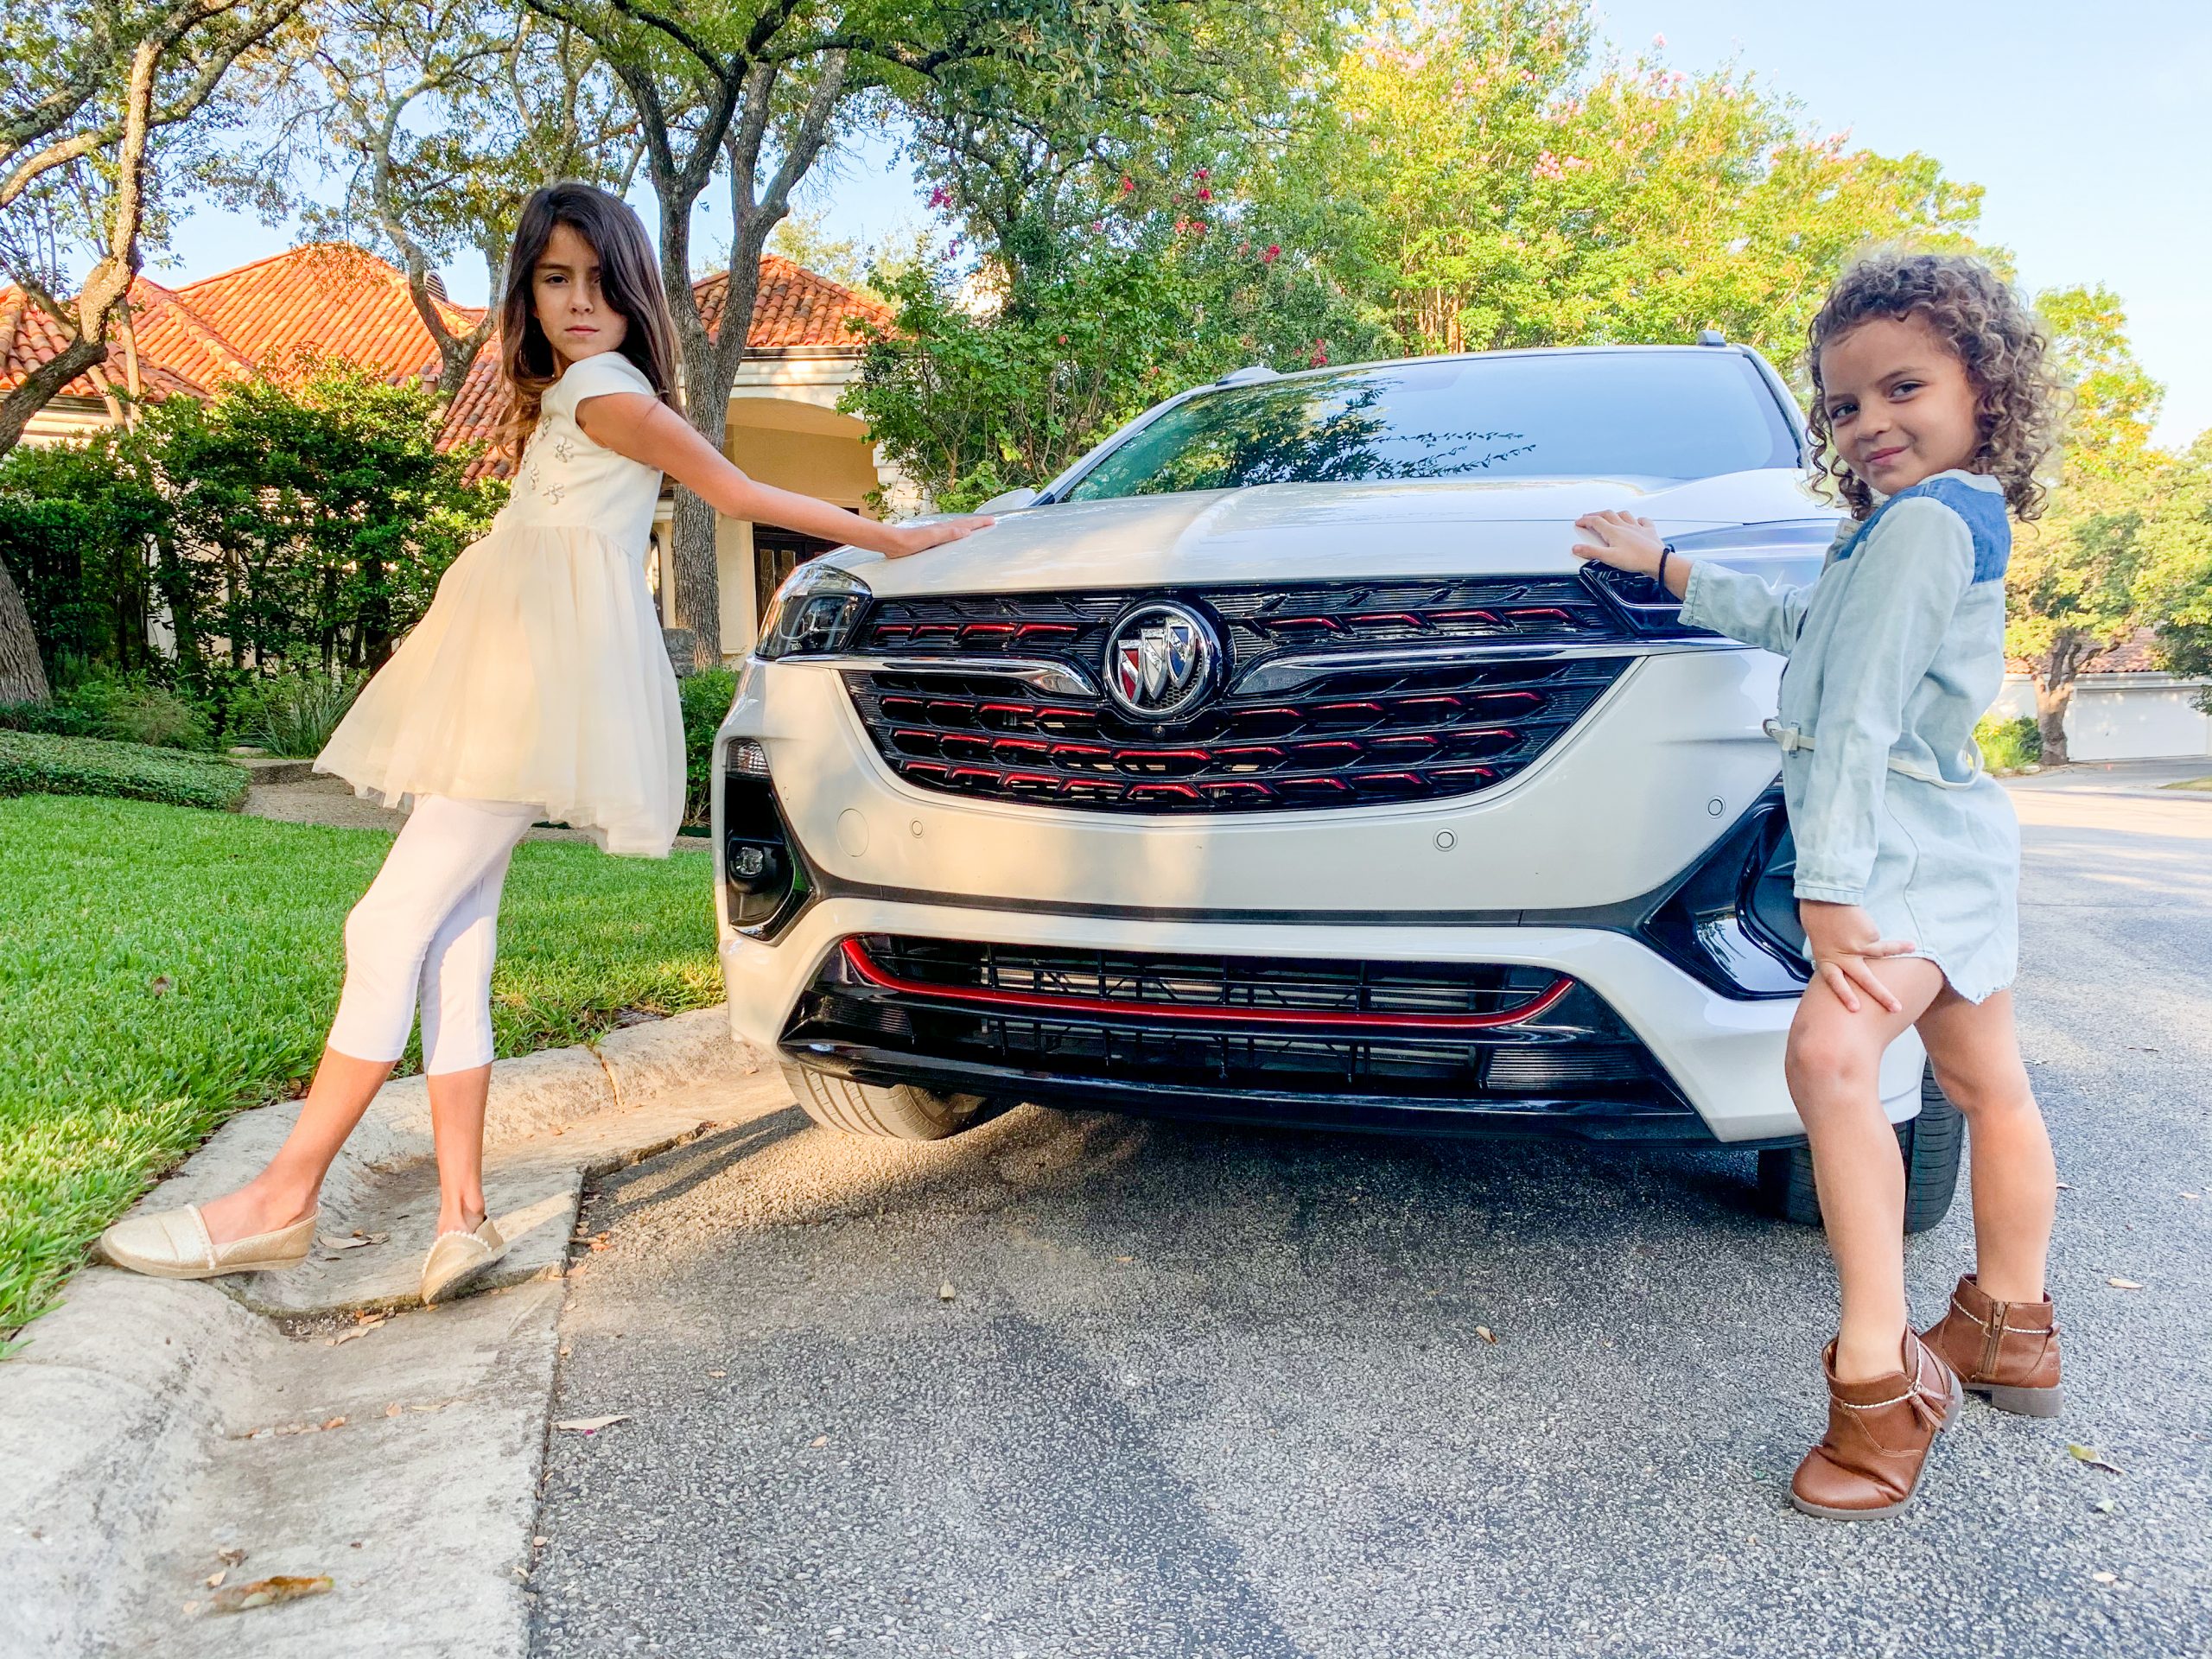 A Beauty of a Buick: Our experience test driving the all new Buick Encore GX